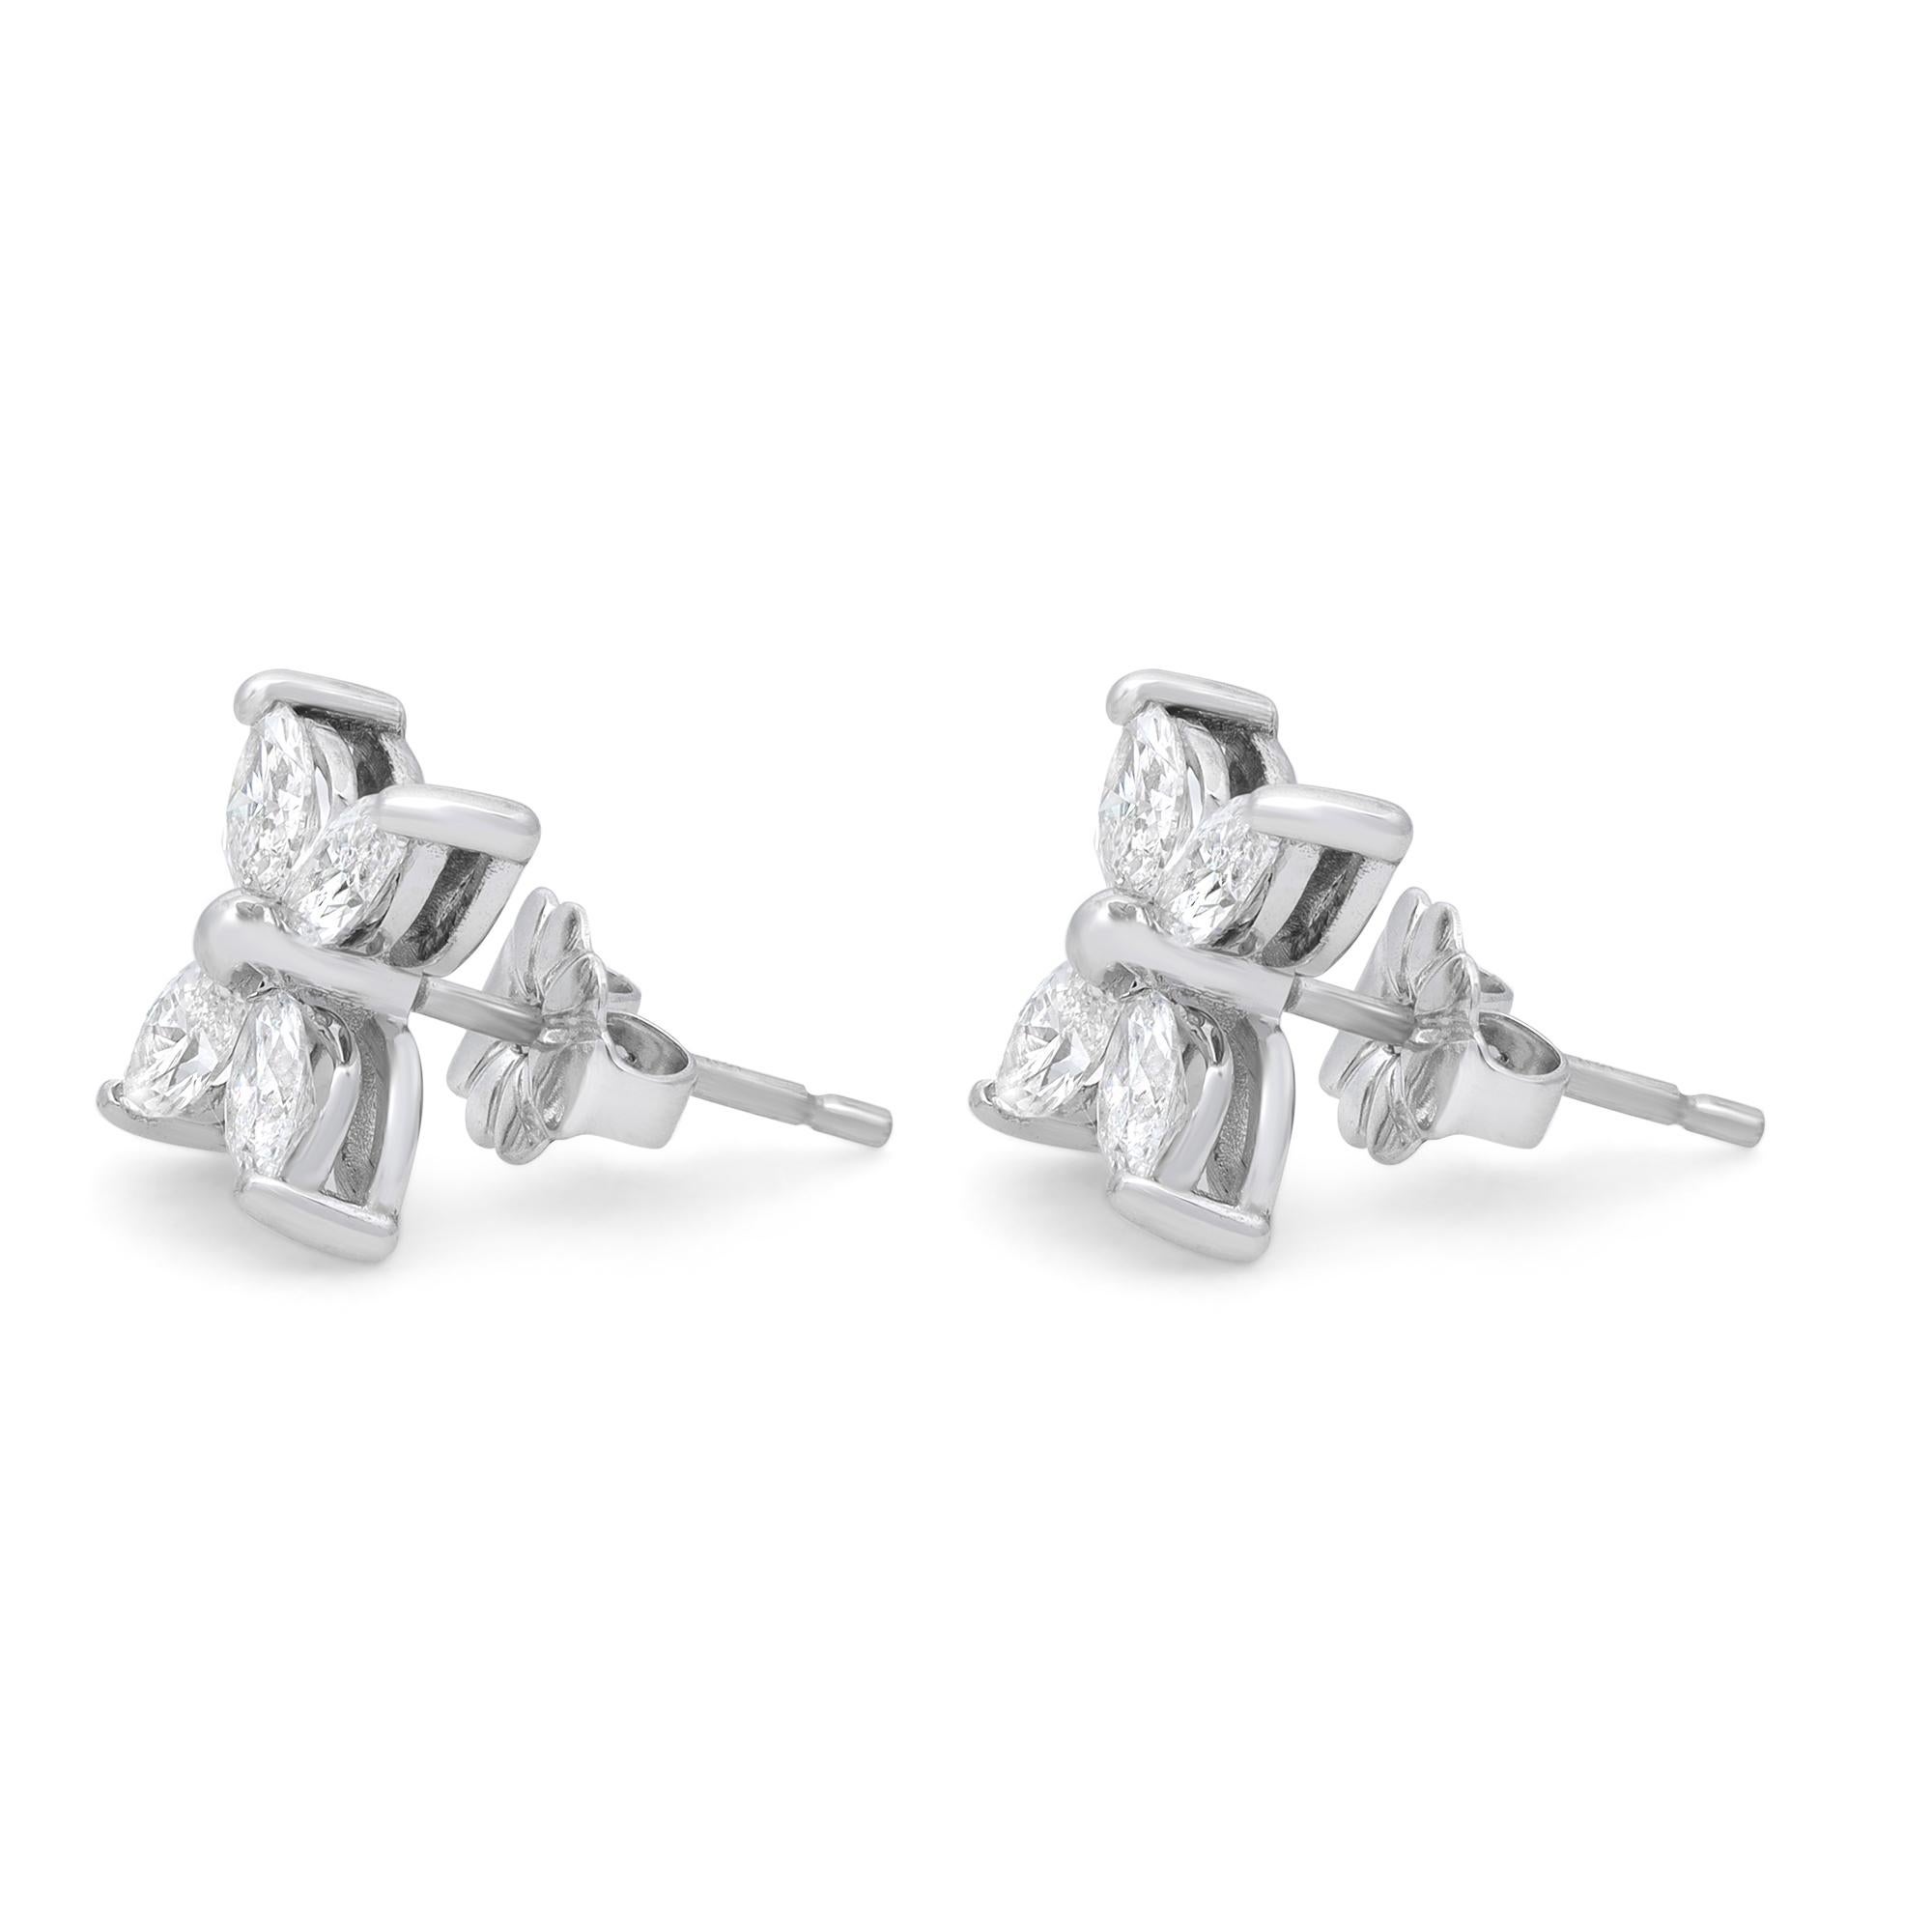 The classic arrangement of 8 stunning Marquise diamonds makes these studs an instant classic. These studs are crafted out of durable 18K white gold and set with 8 high-quality, finely cut Marquise diamonds in a floral arrangement. A simple yet